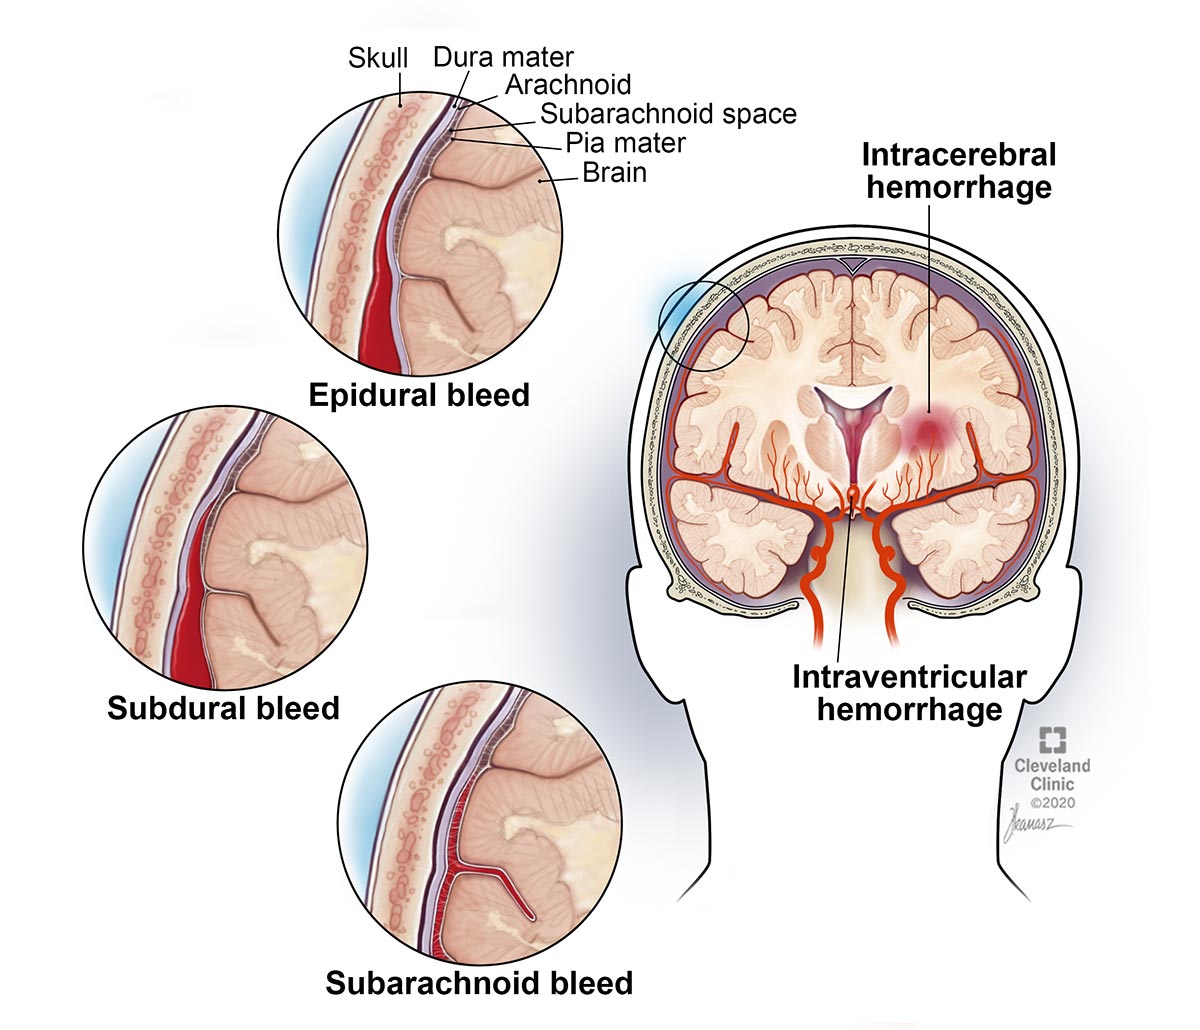 An epidural hematoma is a brain bleed between your skull and the membrane that covers your brain.